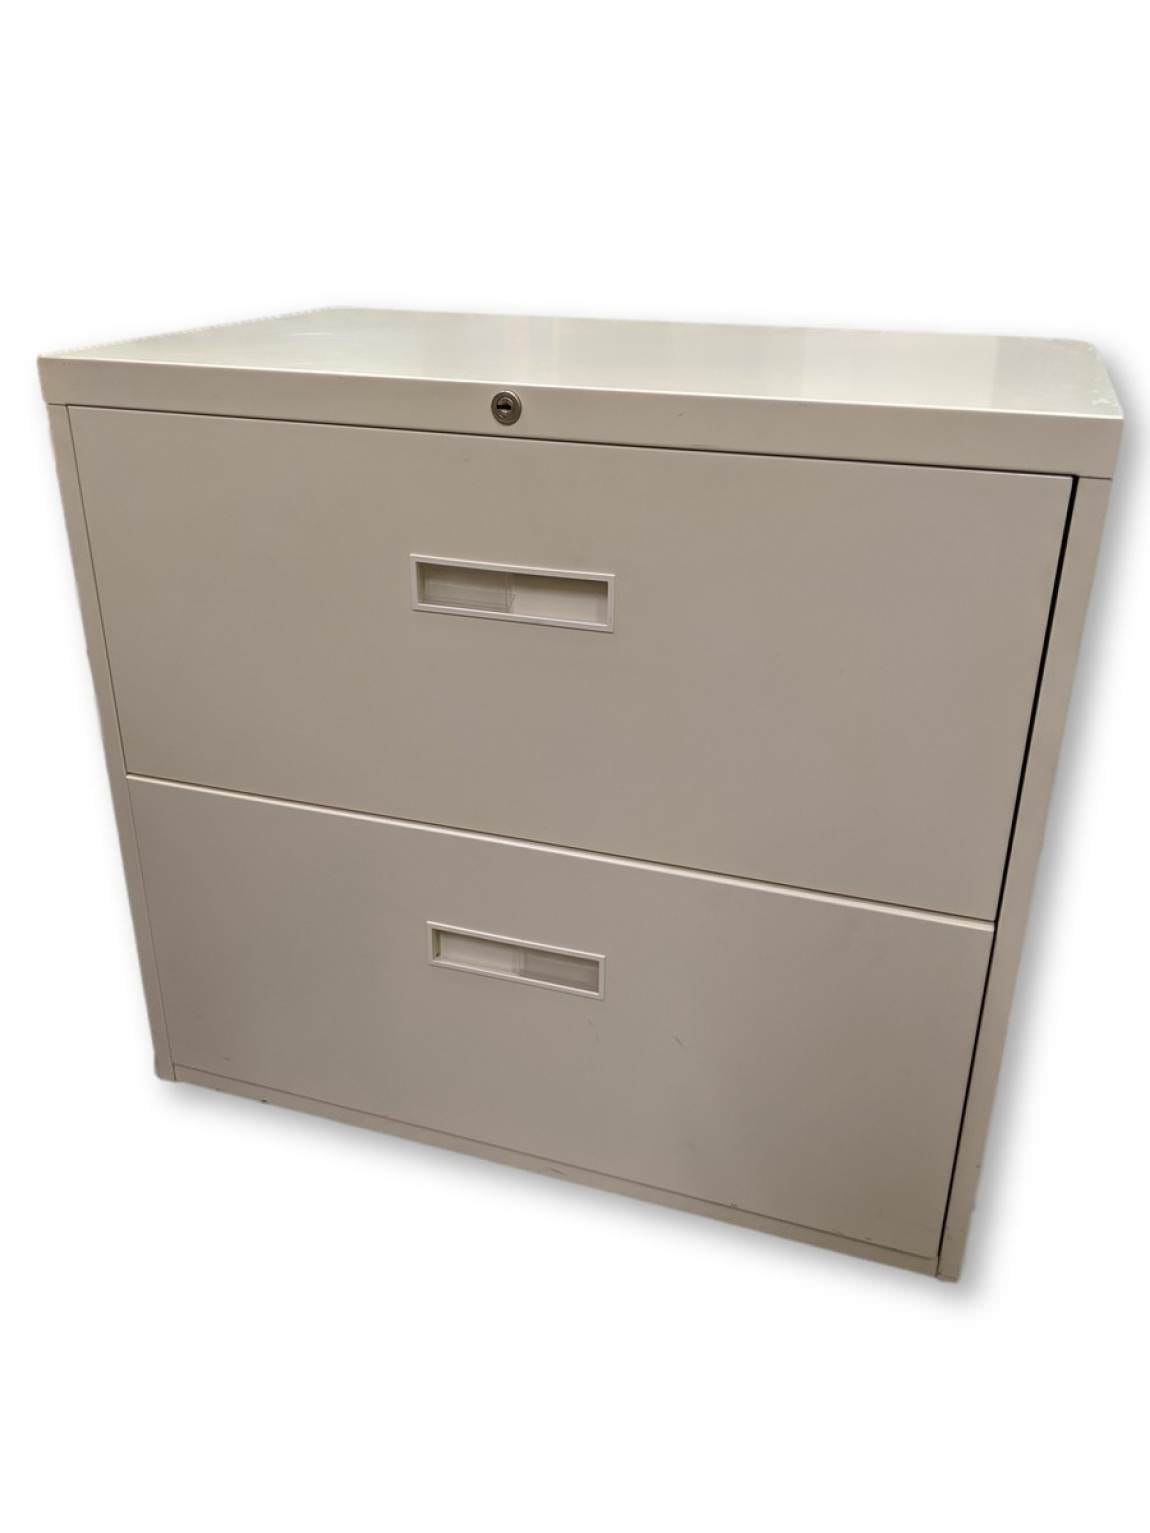 Steelcase Putty 2 Drawer Lateral Filing 30 Inch Wide by Steelcase